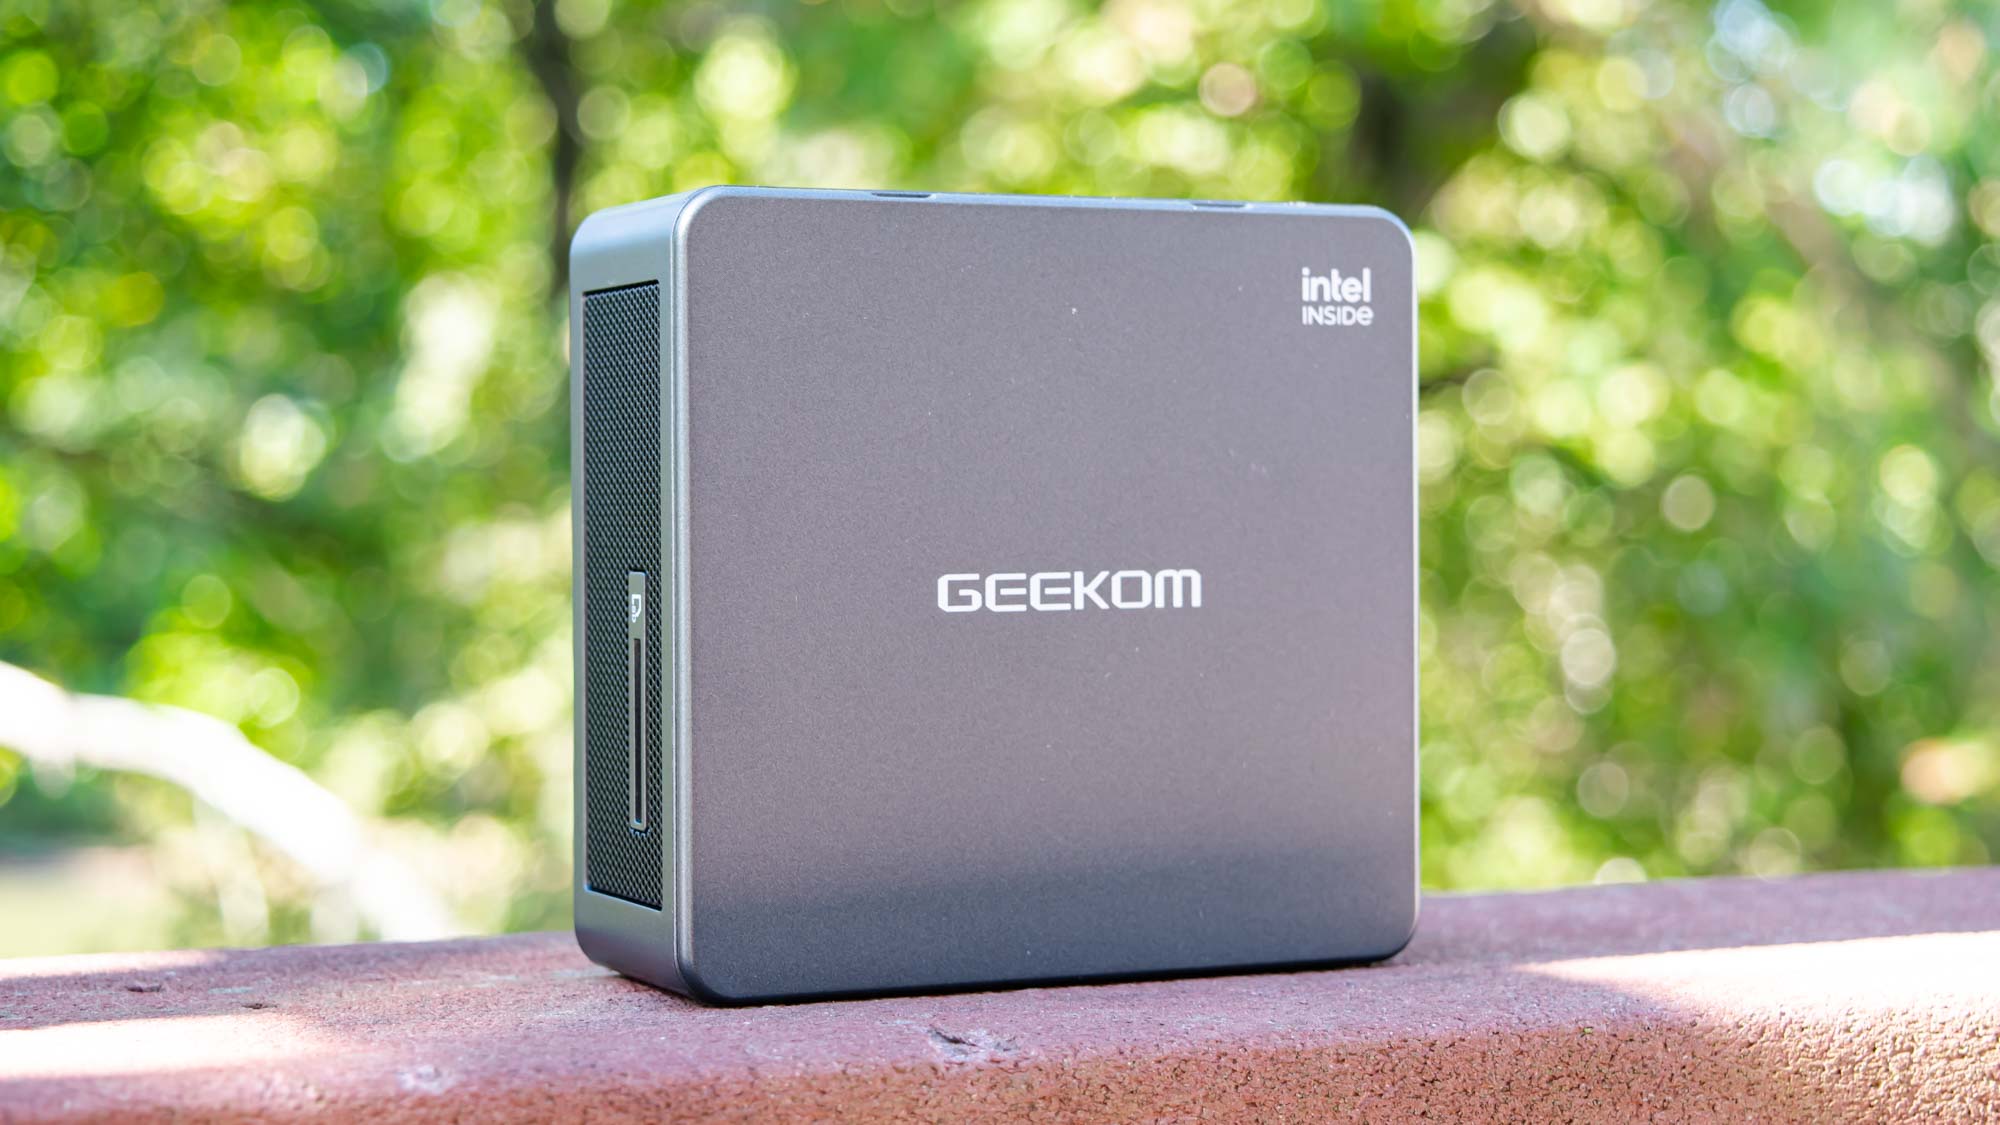 Geekom AS 6 test: This mini PC is impressively fast